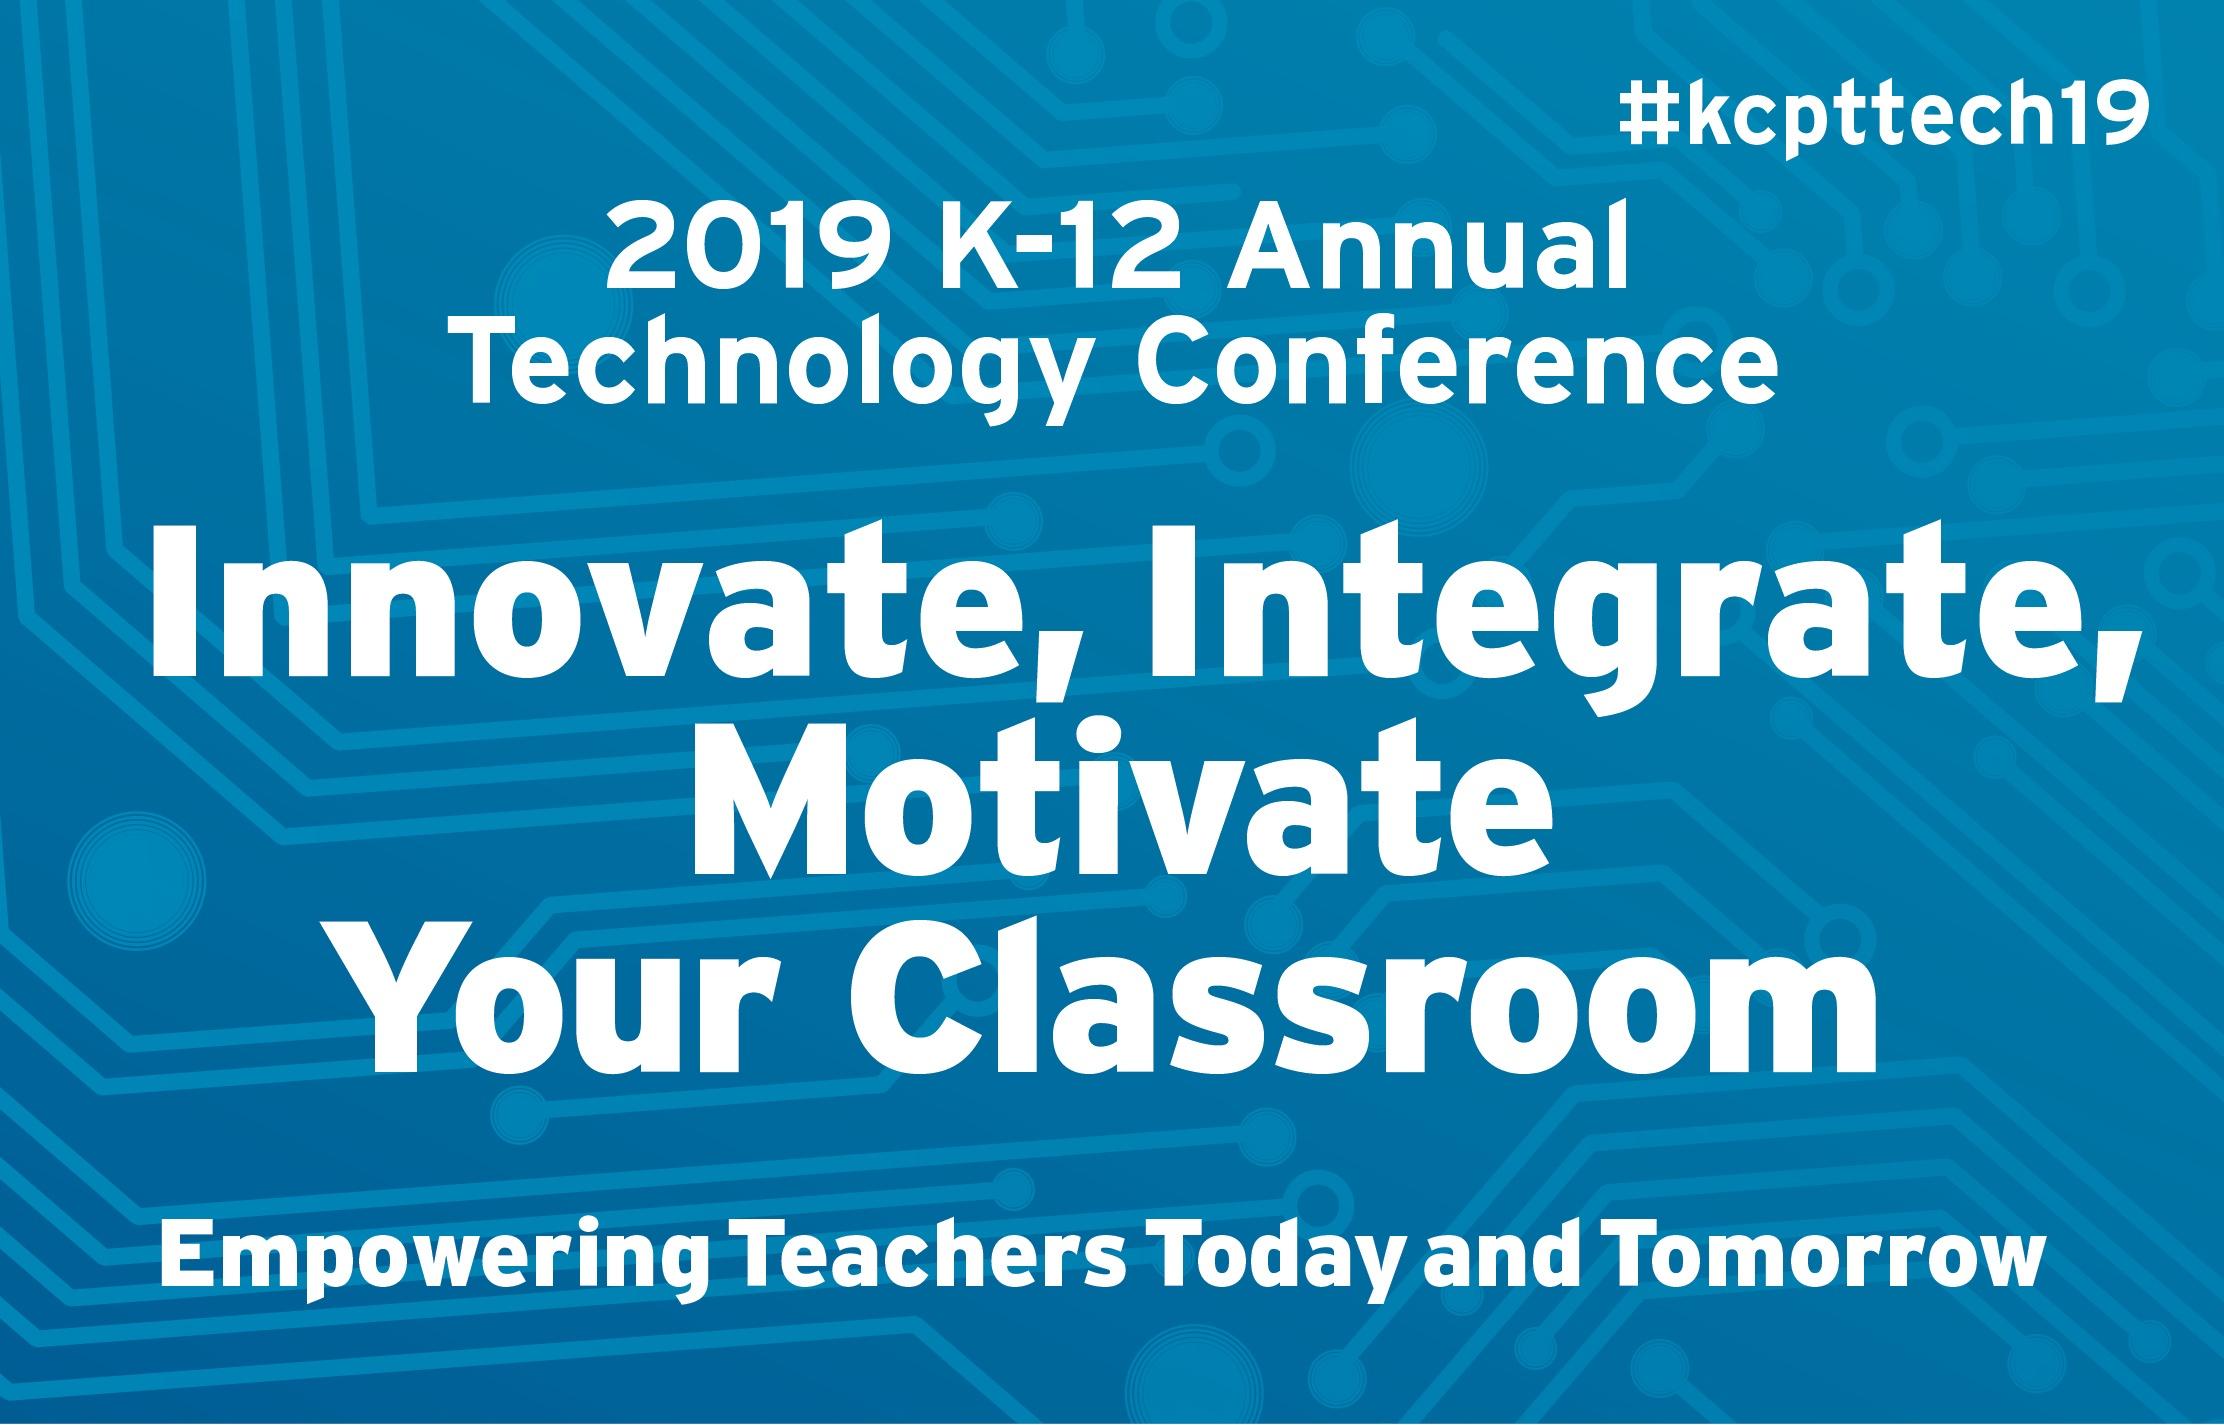 2019 K-12 Annual Technology Conference - Innovate, Integrate, Motivate Your Classroom - Empowering Teachers Today and Tomorrow